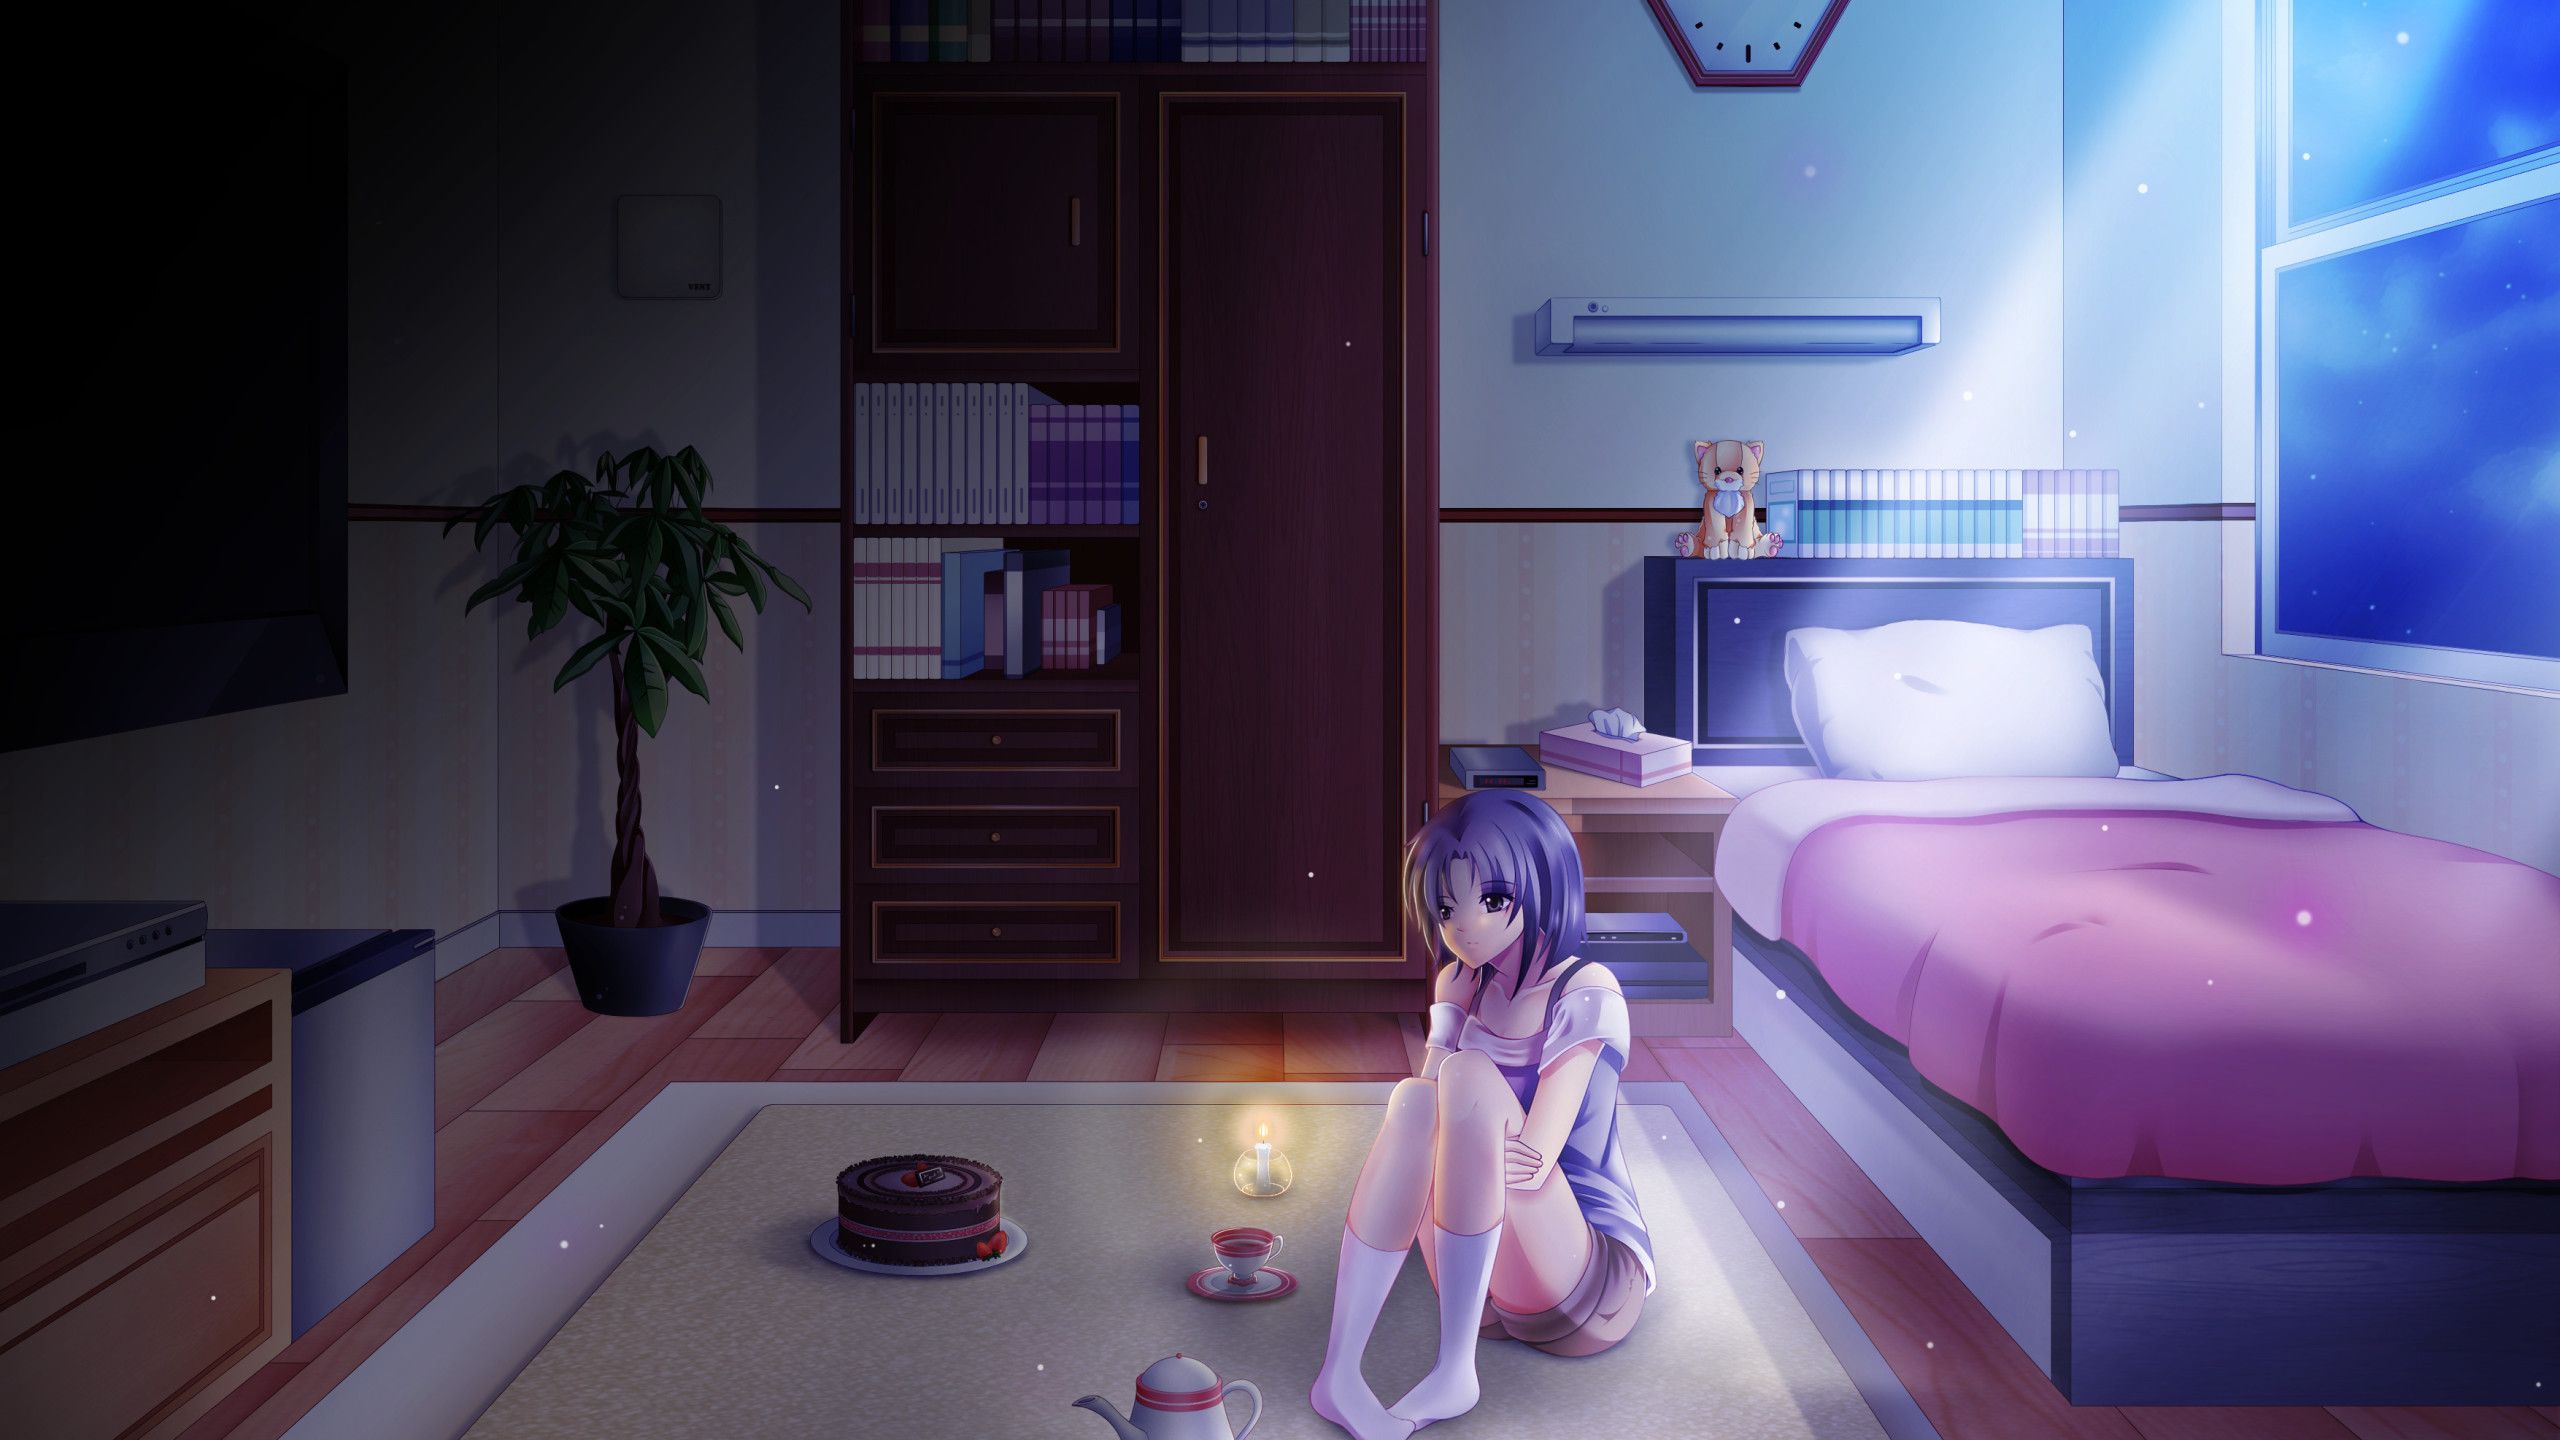 Anime Girl Alone In Room On Her Birthday 1440P